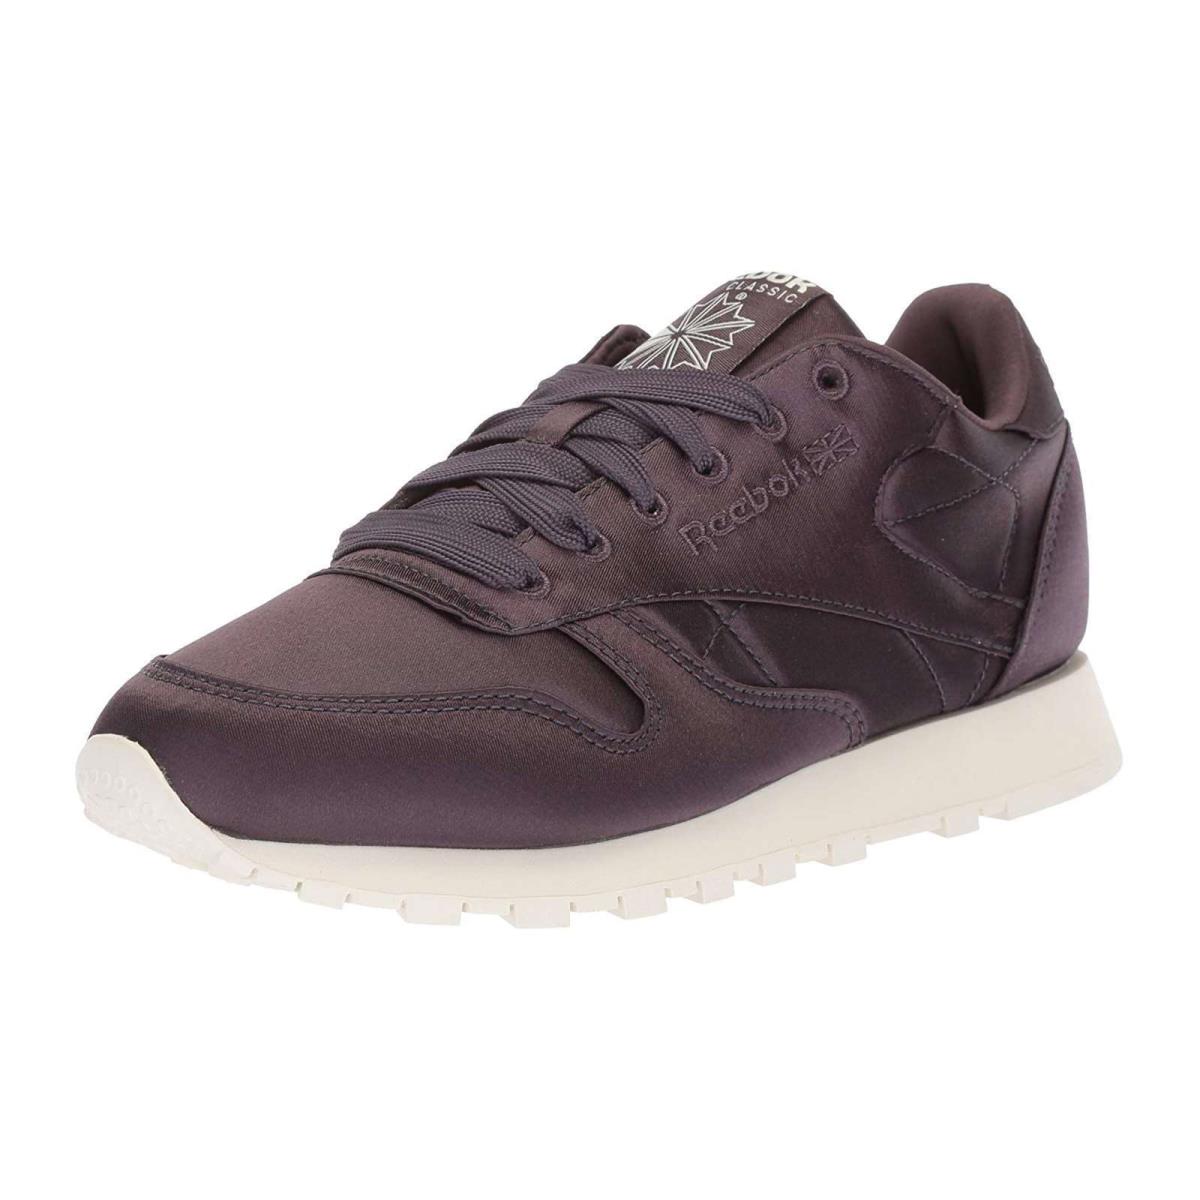 Reebok Women`s Classics Retro Heritage Lace Up Sneakers Casual Shoes Purple